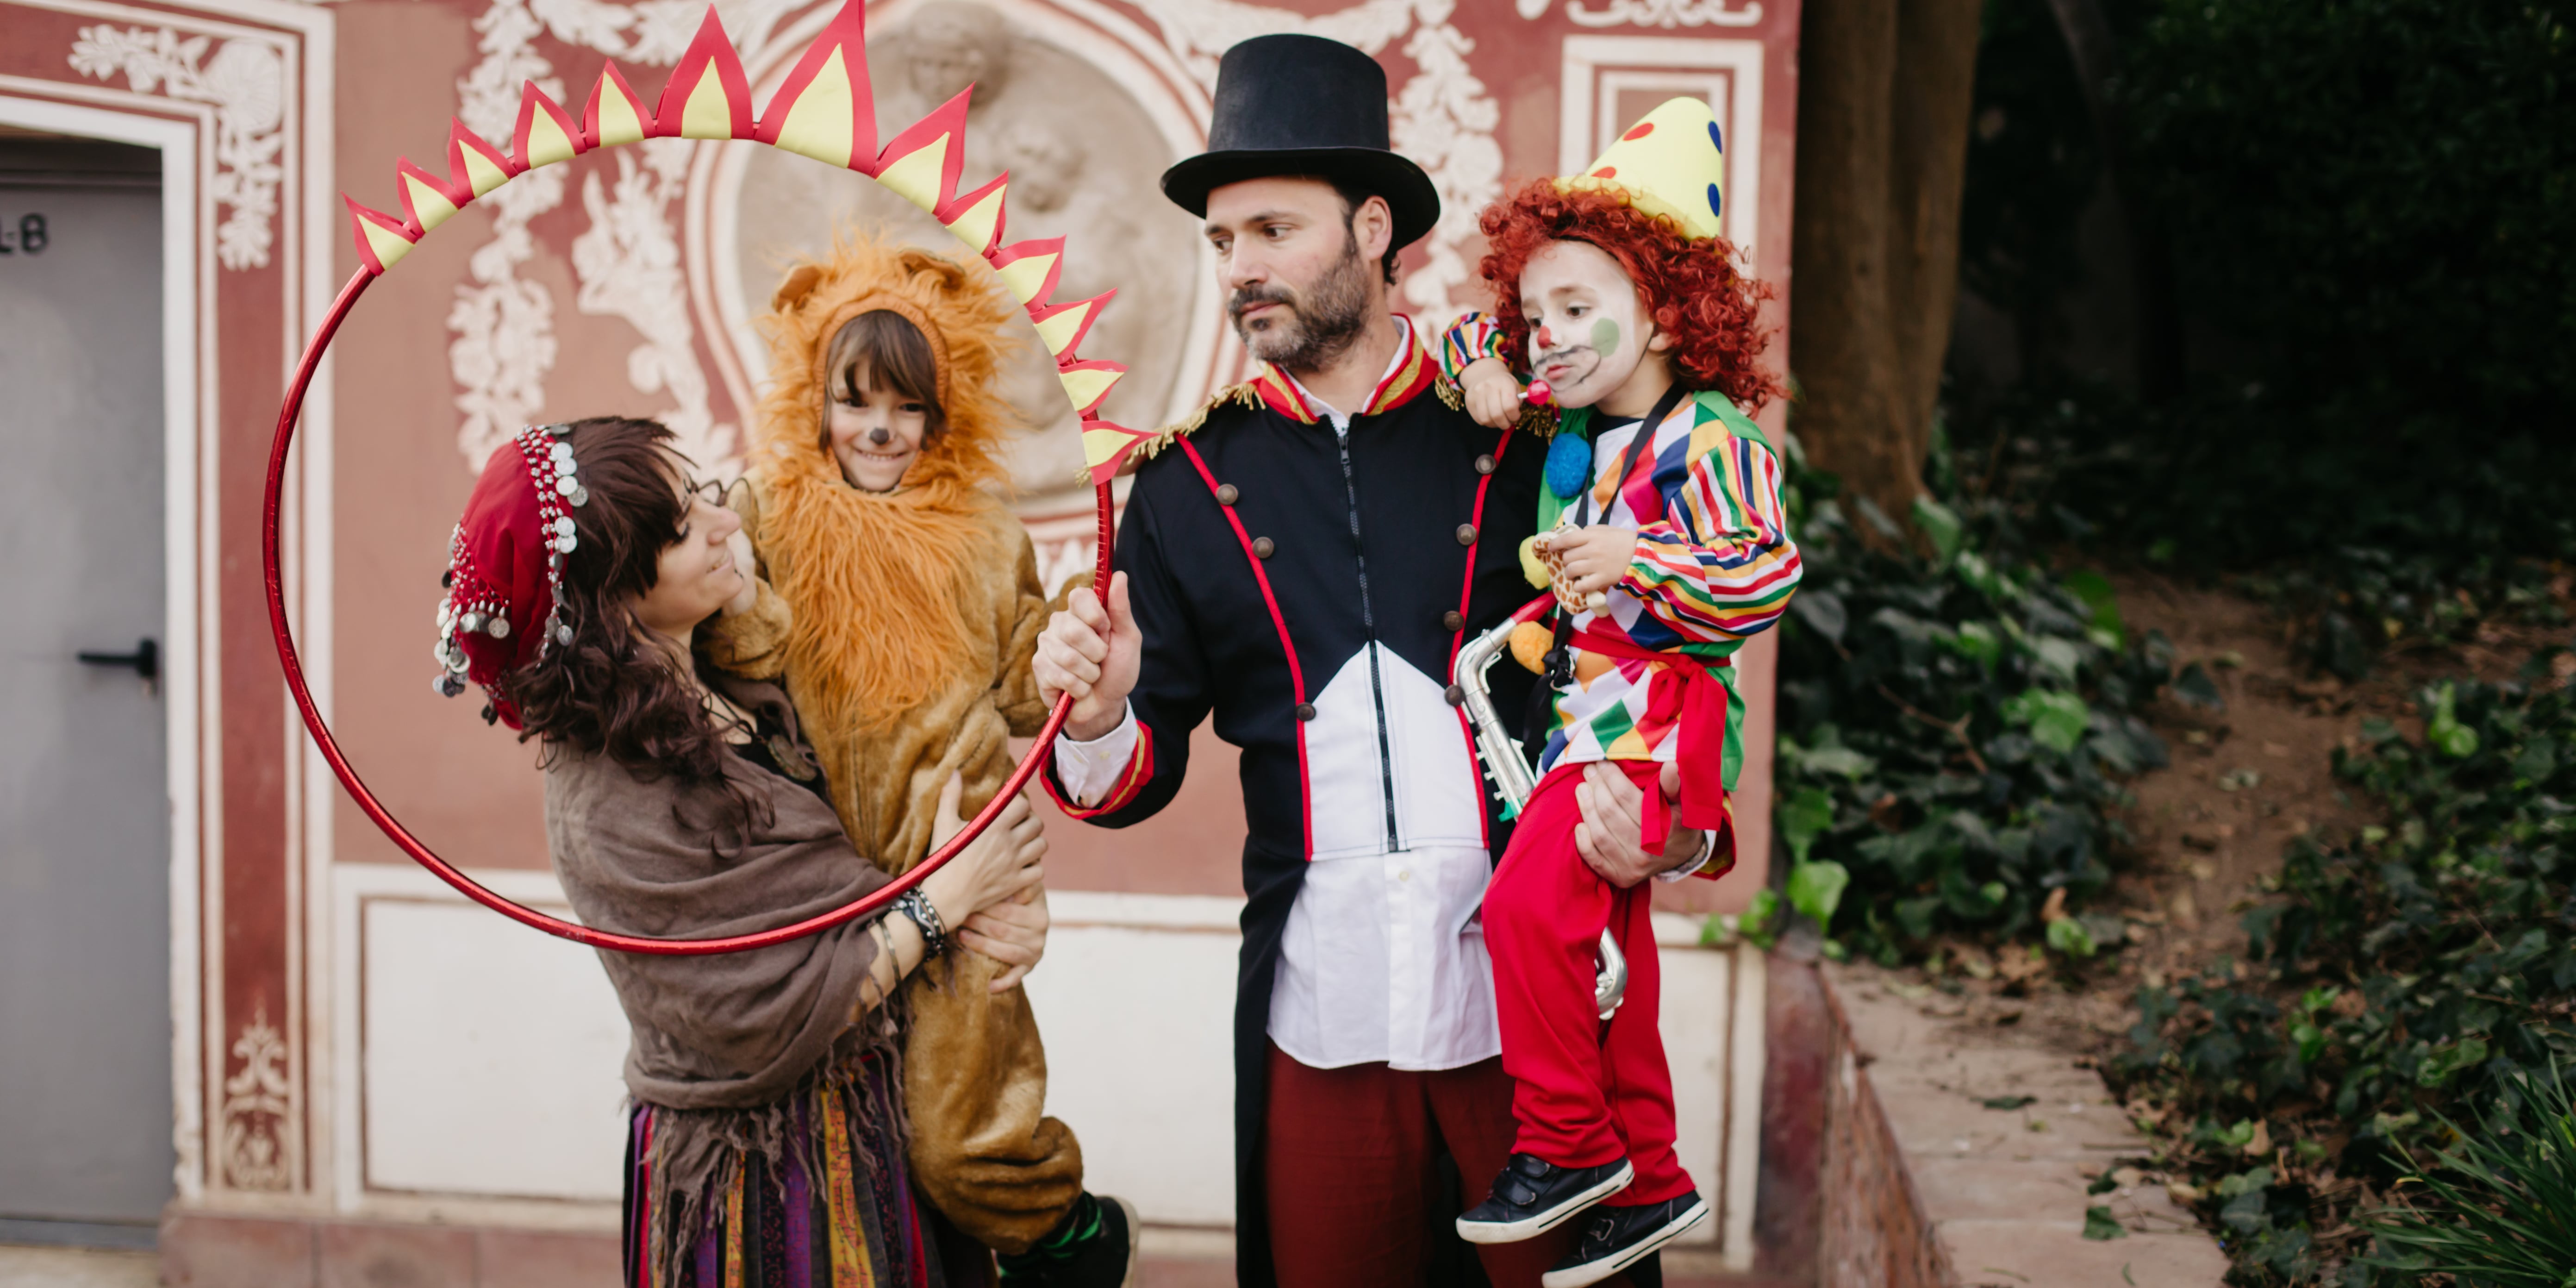 Find some amazingly creative family Halloween costume ideas to